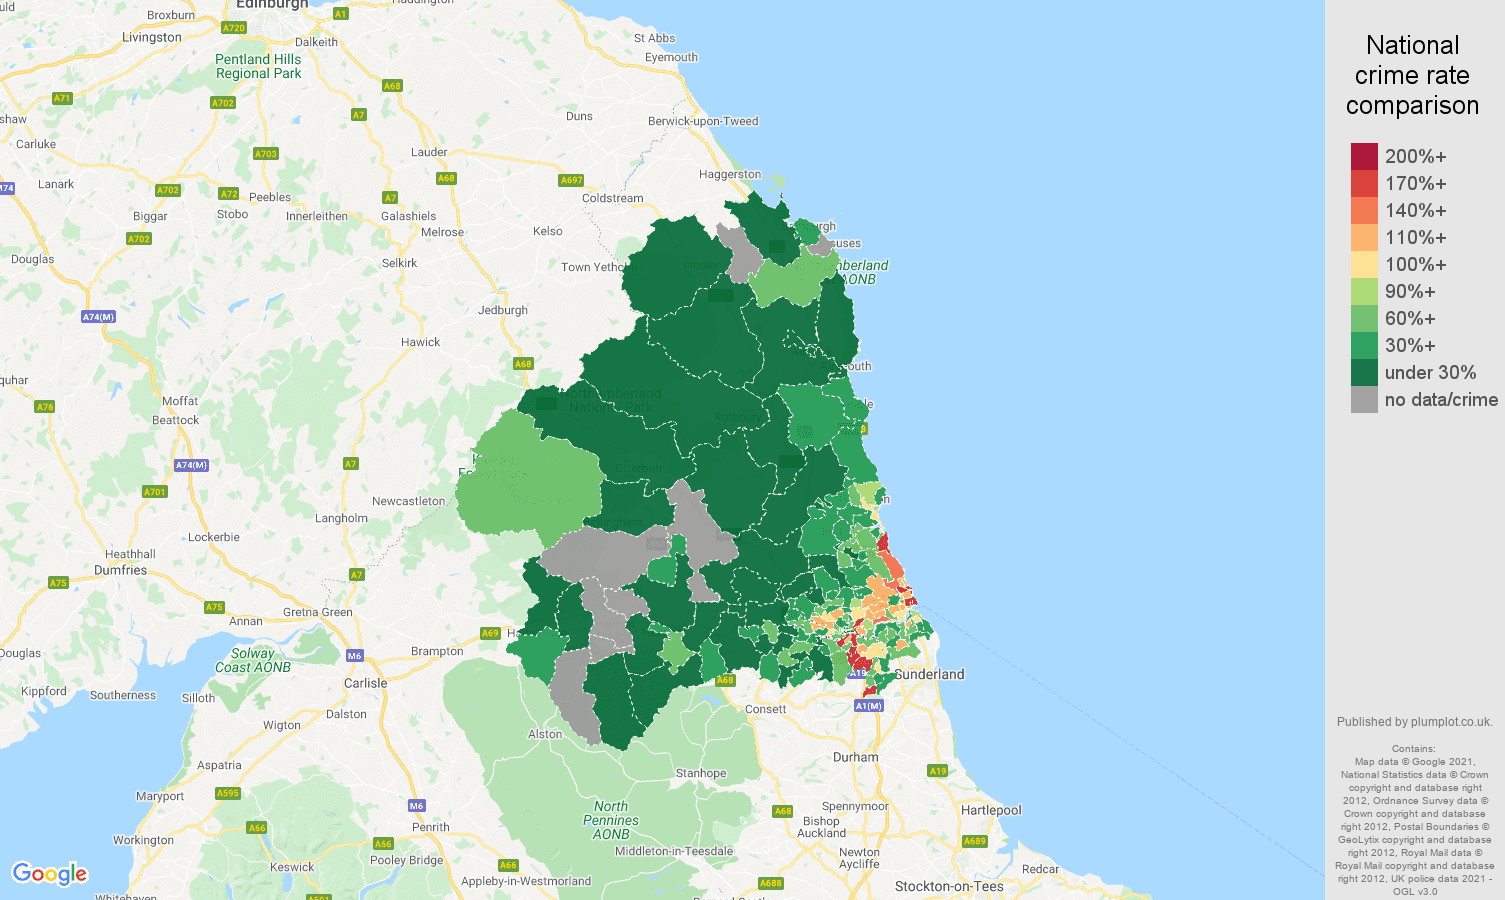 Newcastle upon Tyne vehicle crime rate comparison map